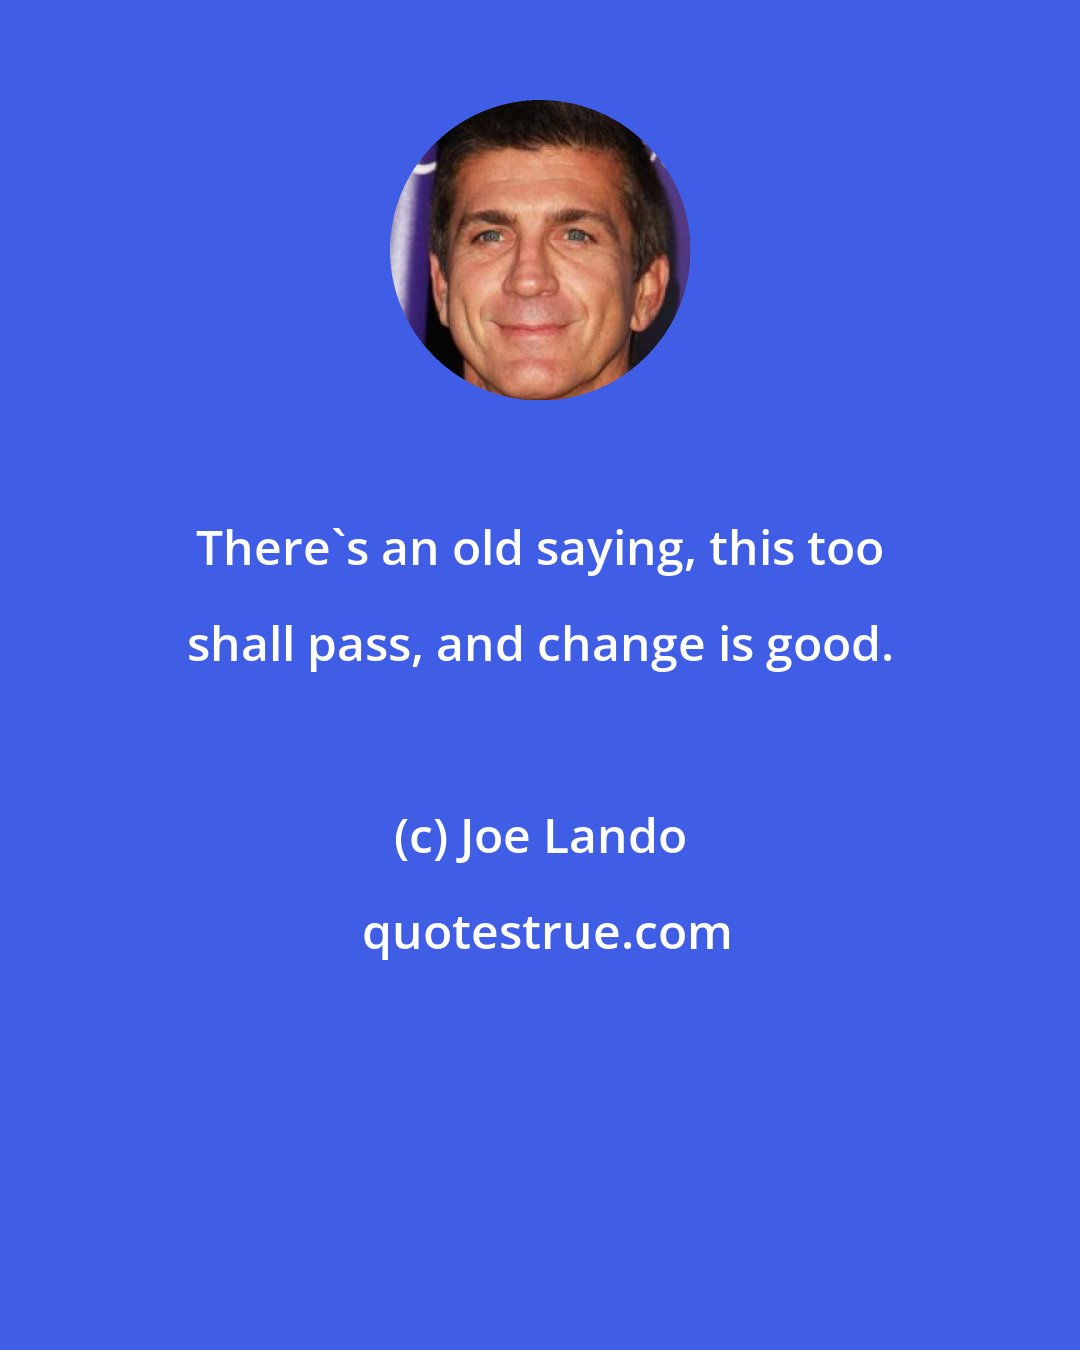 Joe Lando: There's an old saying, this too shall pass, and change is good.